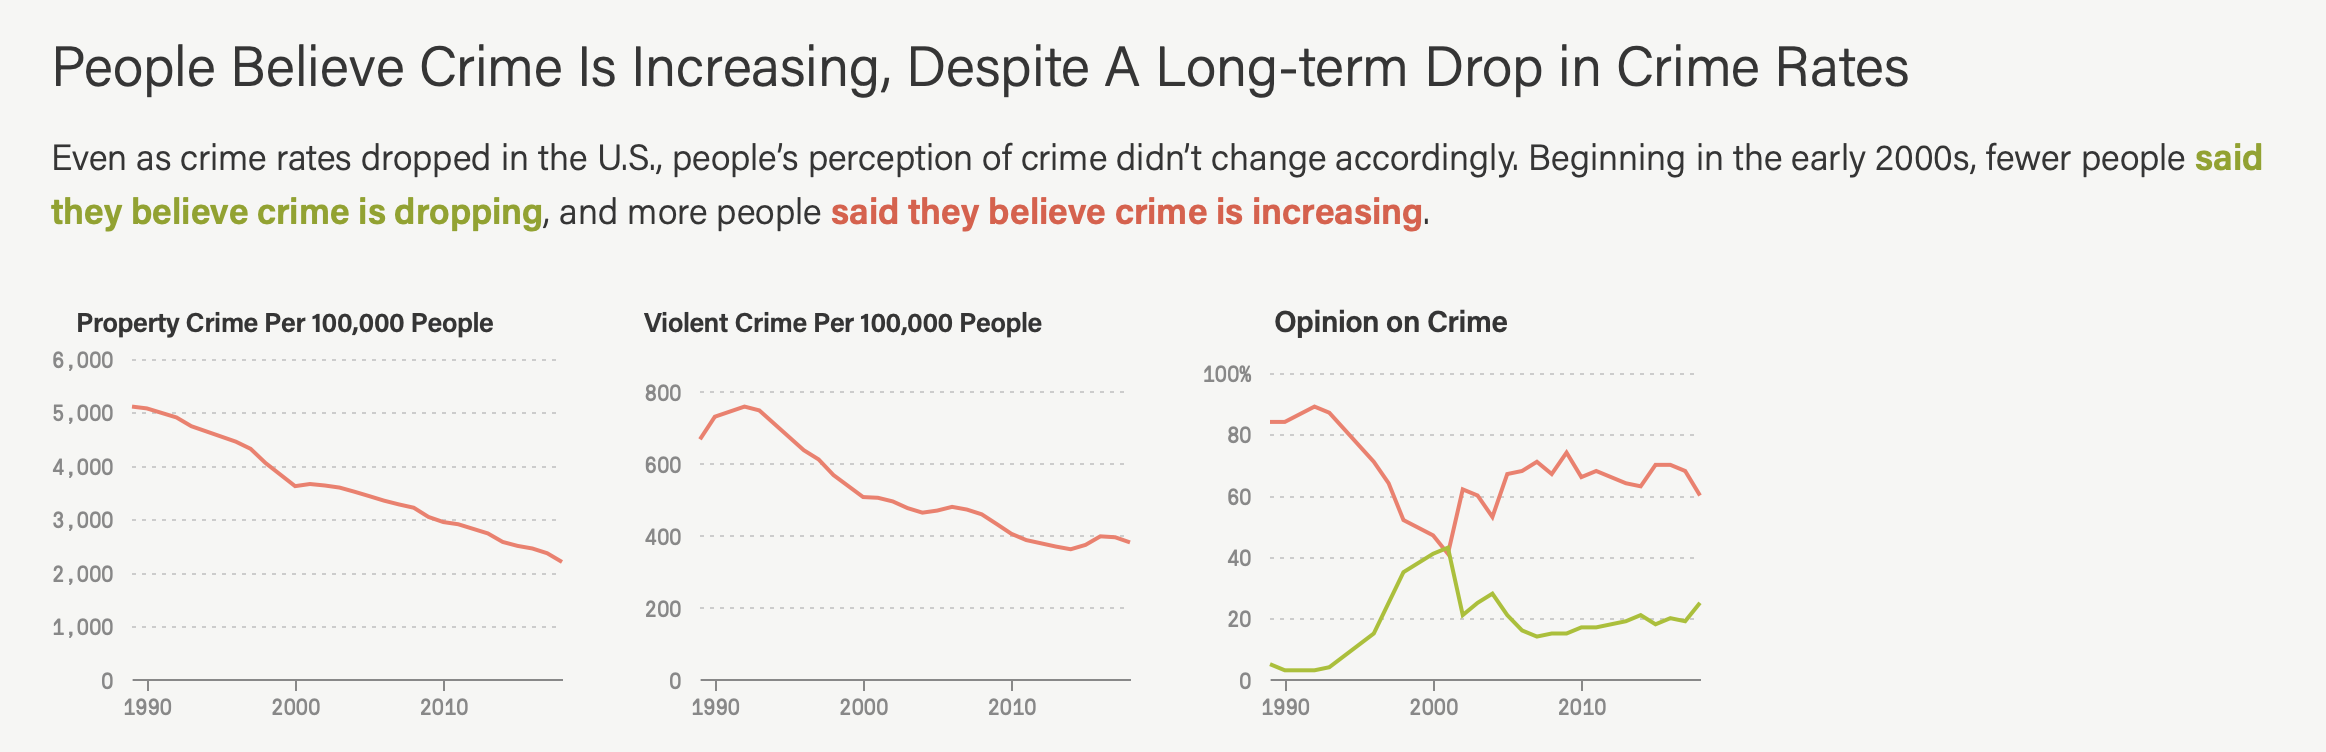 believe and crime rates